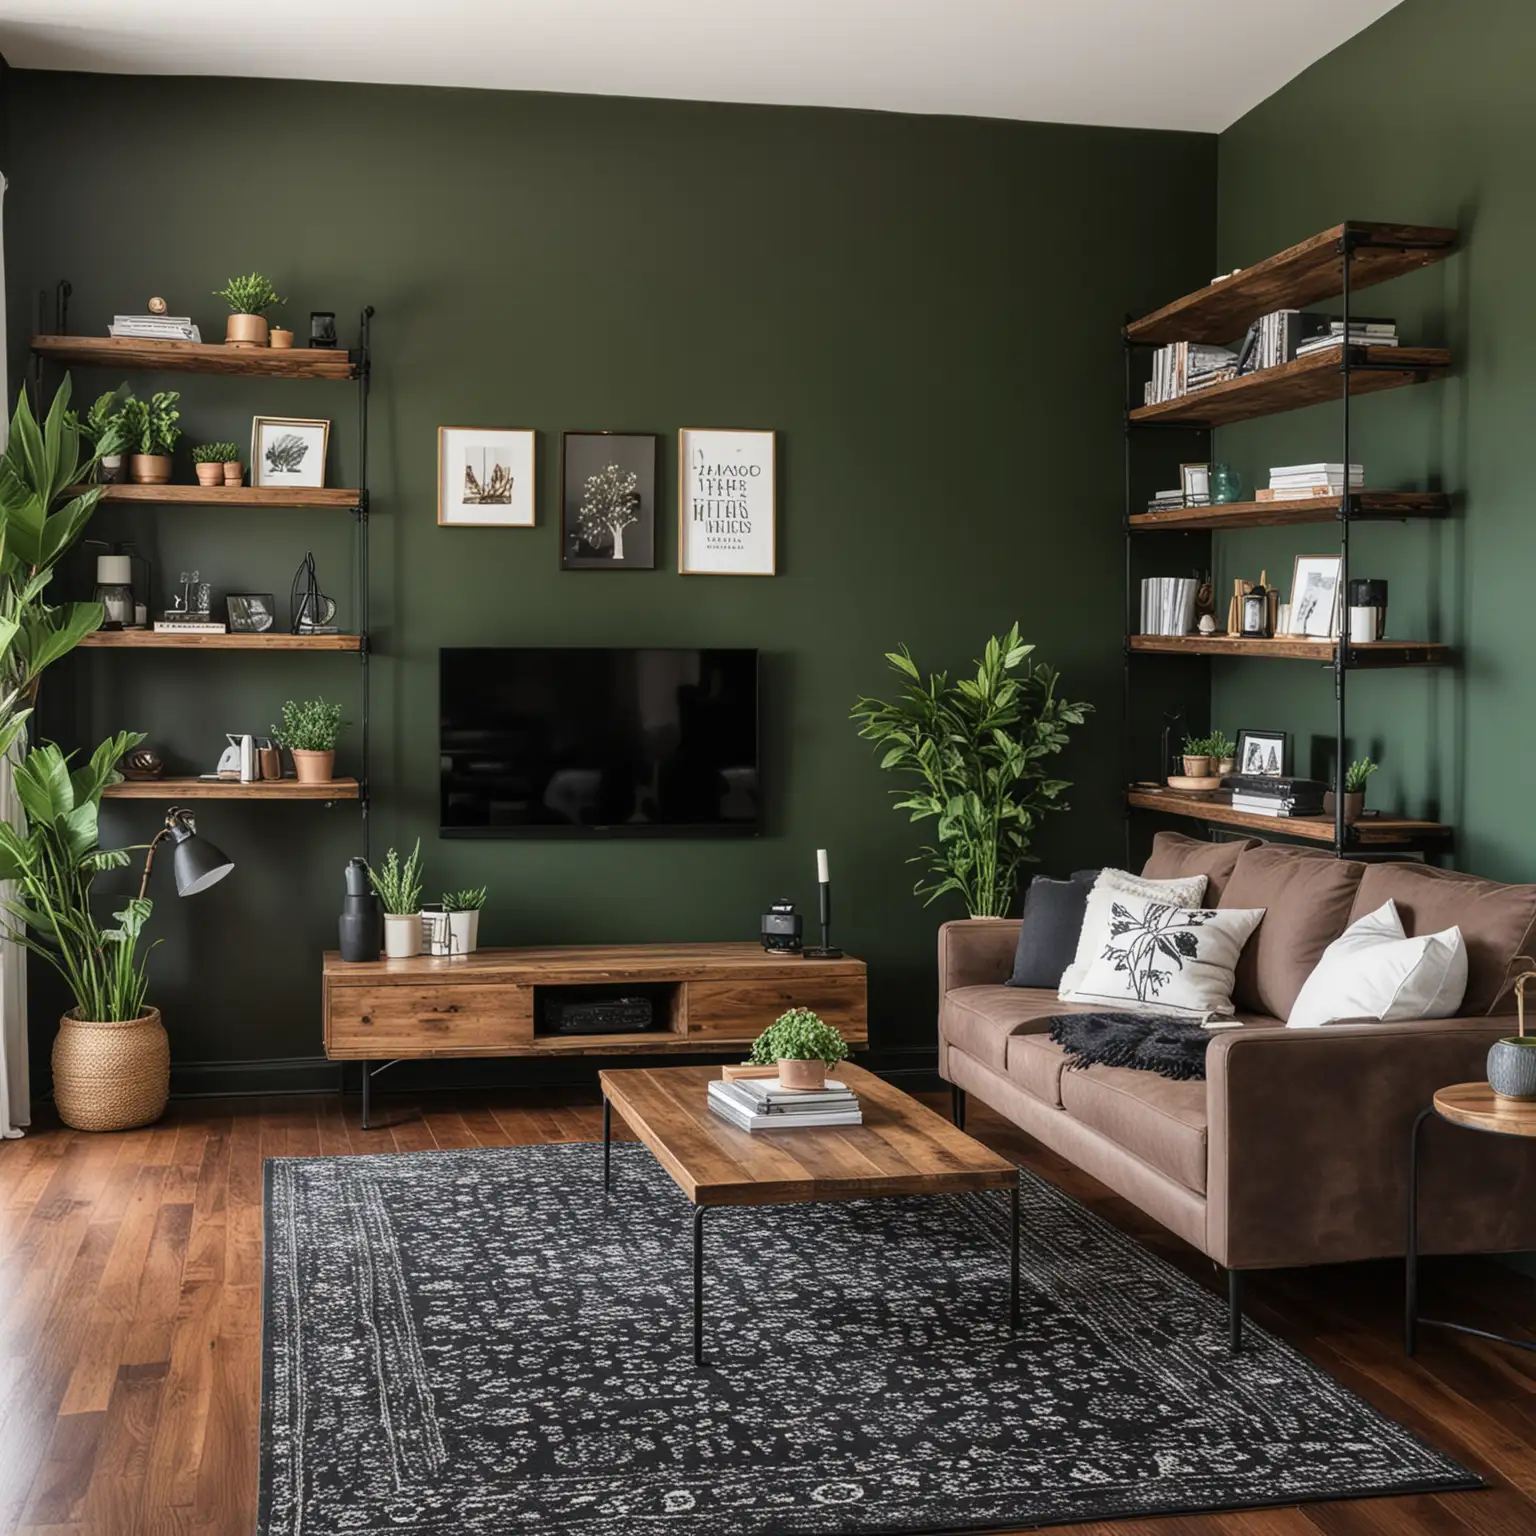 A living room that has darker painted walls, wood floors, black metal pipe and dark wood for shelving, an area rug. Dark wood, dark paint. Flat TV on the wall, small table with a lamp, couch.  Green brown black white